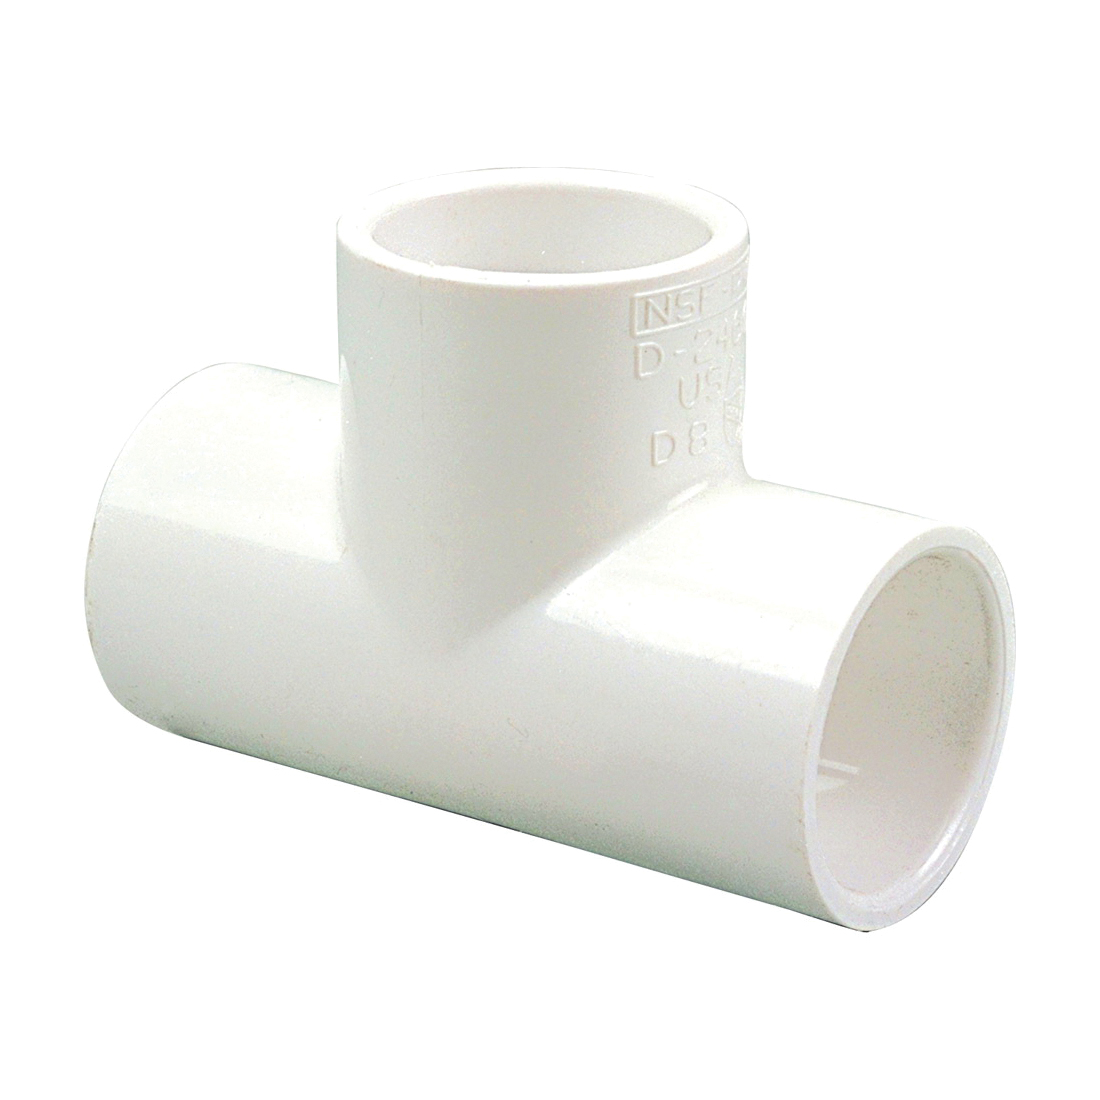 NIBCO® L112260P 4611 Reducing Tee, 4 x 4 x 1-1/2 in Nominal, Slip End Style, SCH 40/STD, PVC, Domestic